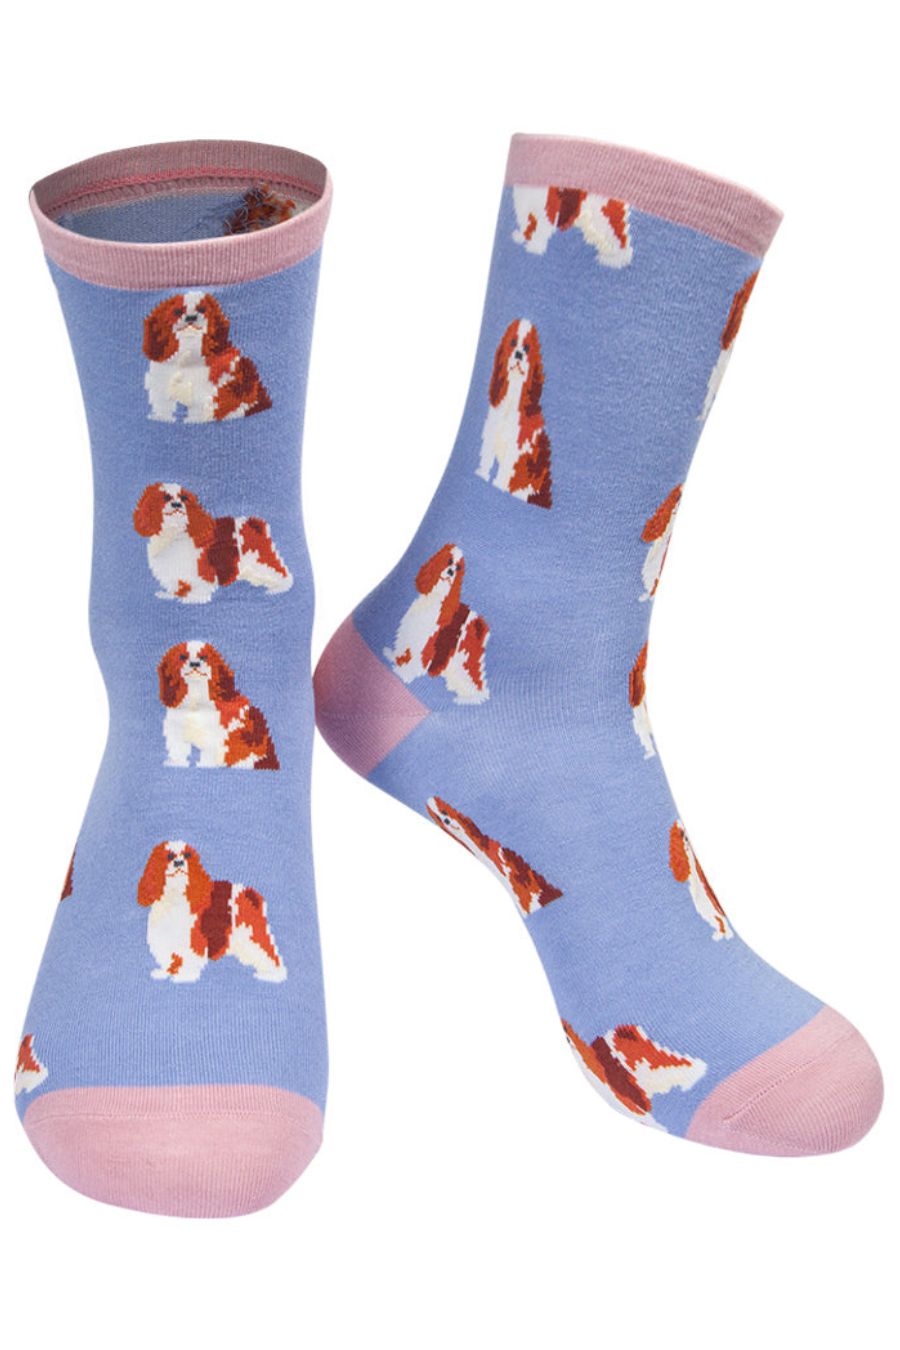 lilac and pink bamboo ankle socks with king charles spaniels all over them